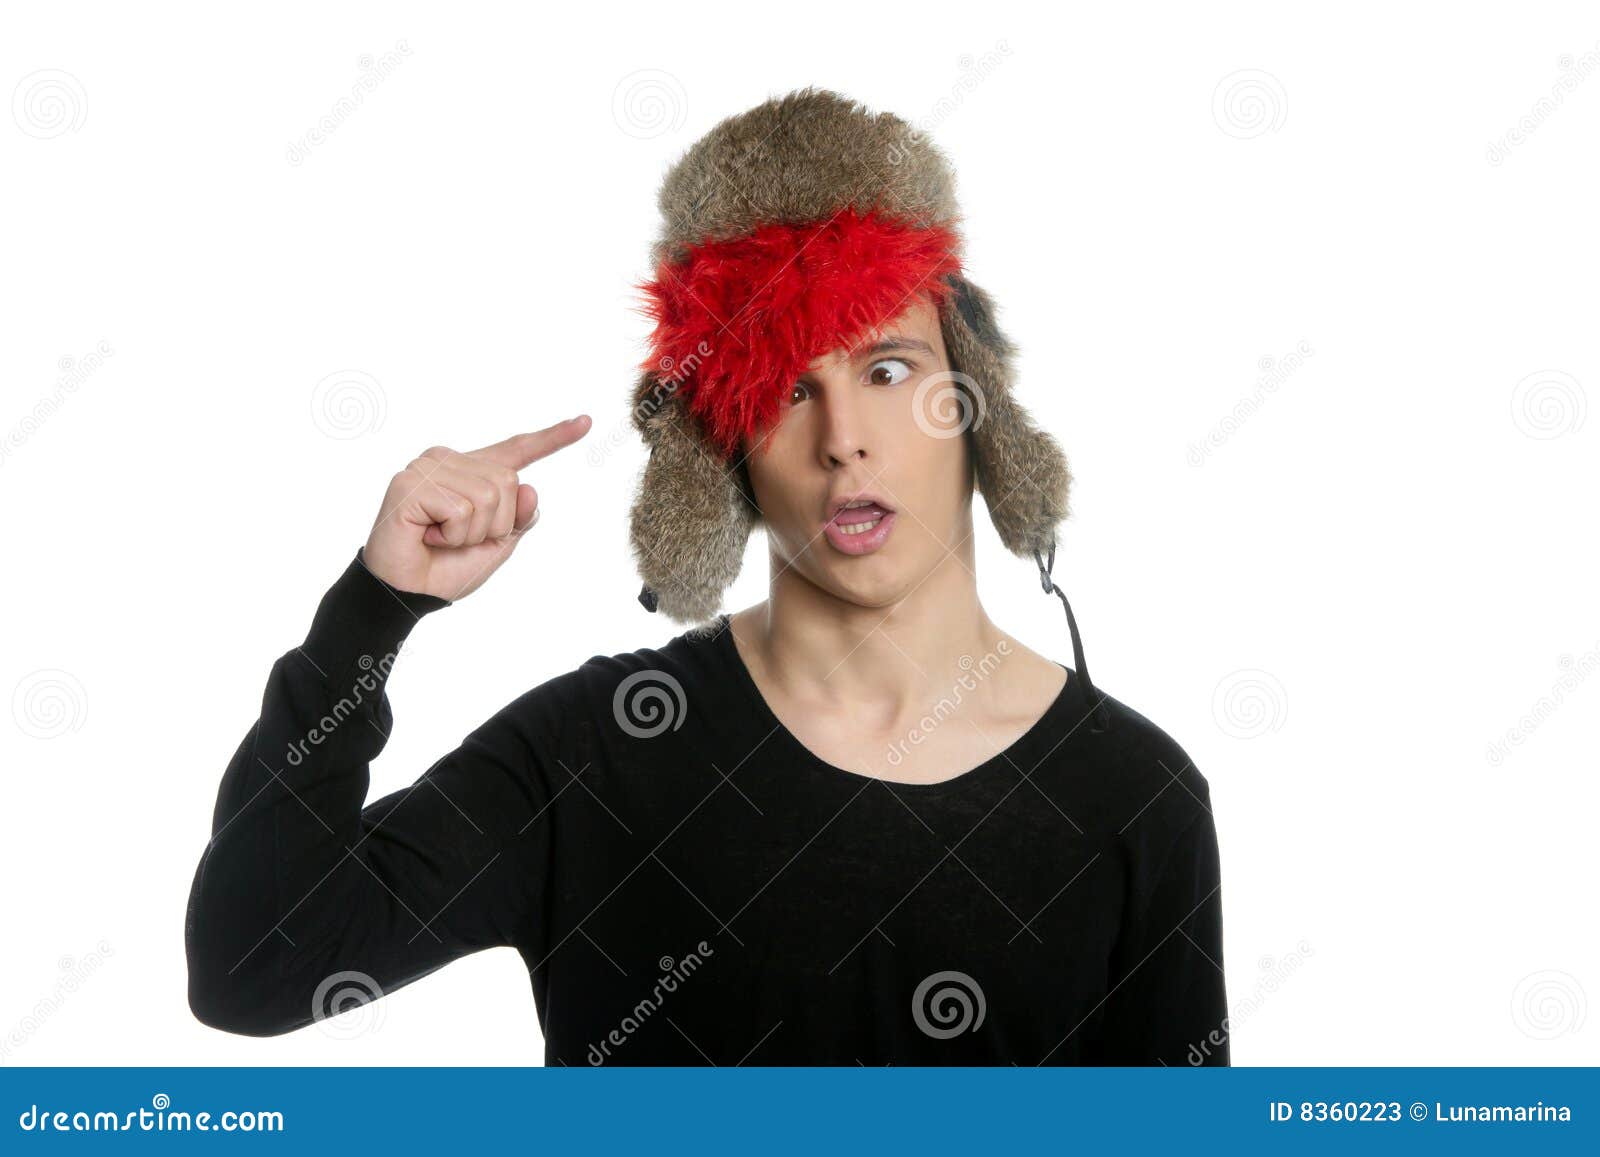 Funny Guy Naked With Blue Wig And Red Tie Stock Image 